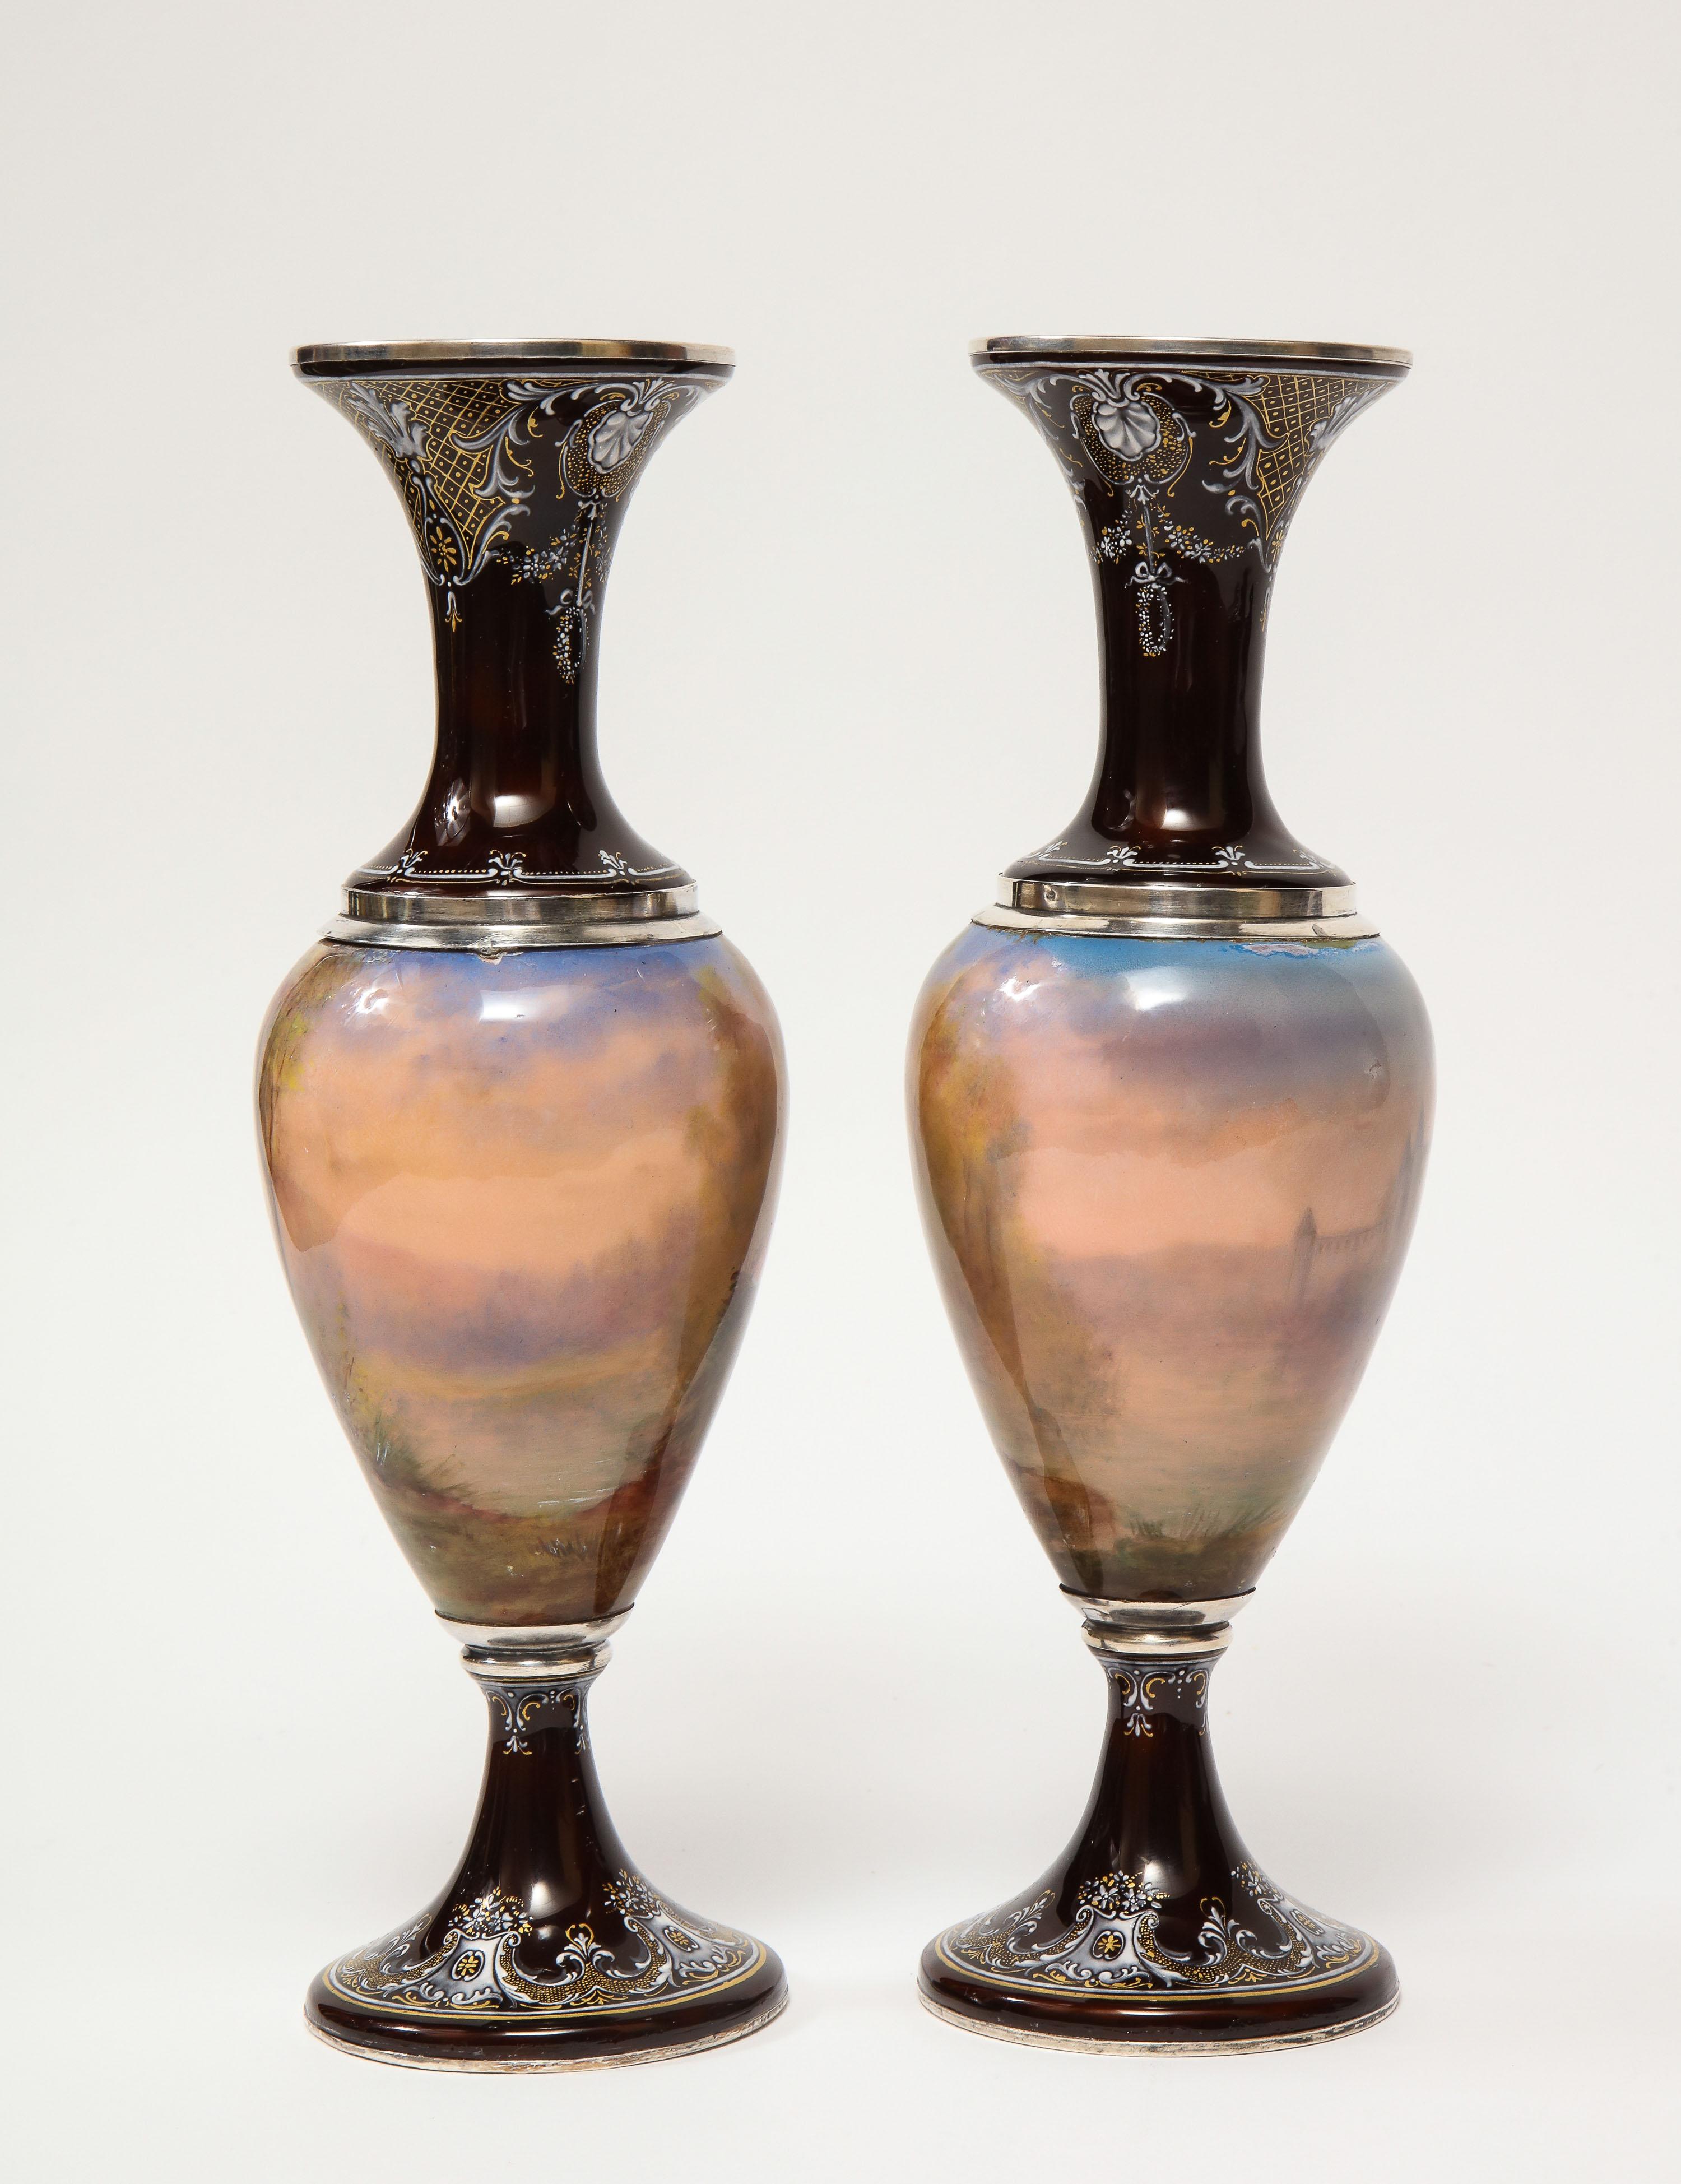 Pair of French Silver & Limoges Enamel Vases, Retailed by Tiffany & Co. 2